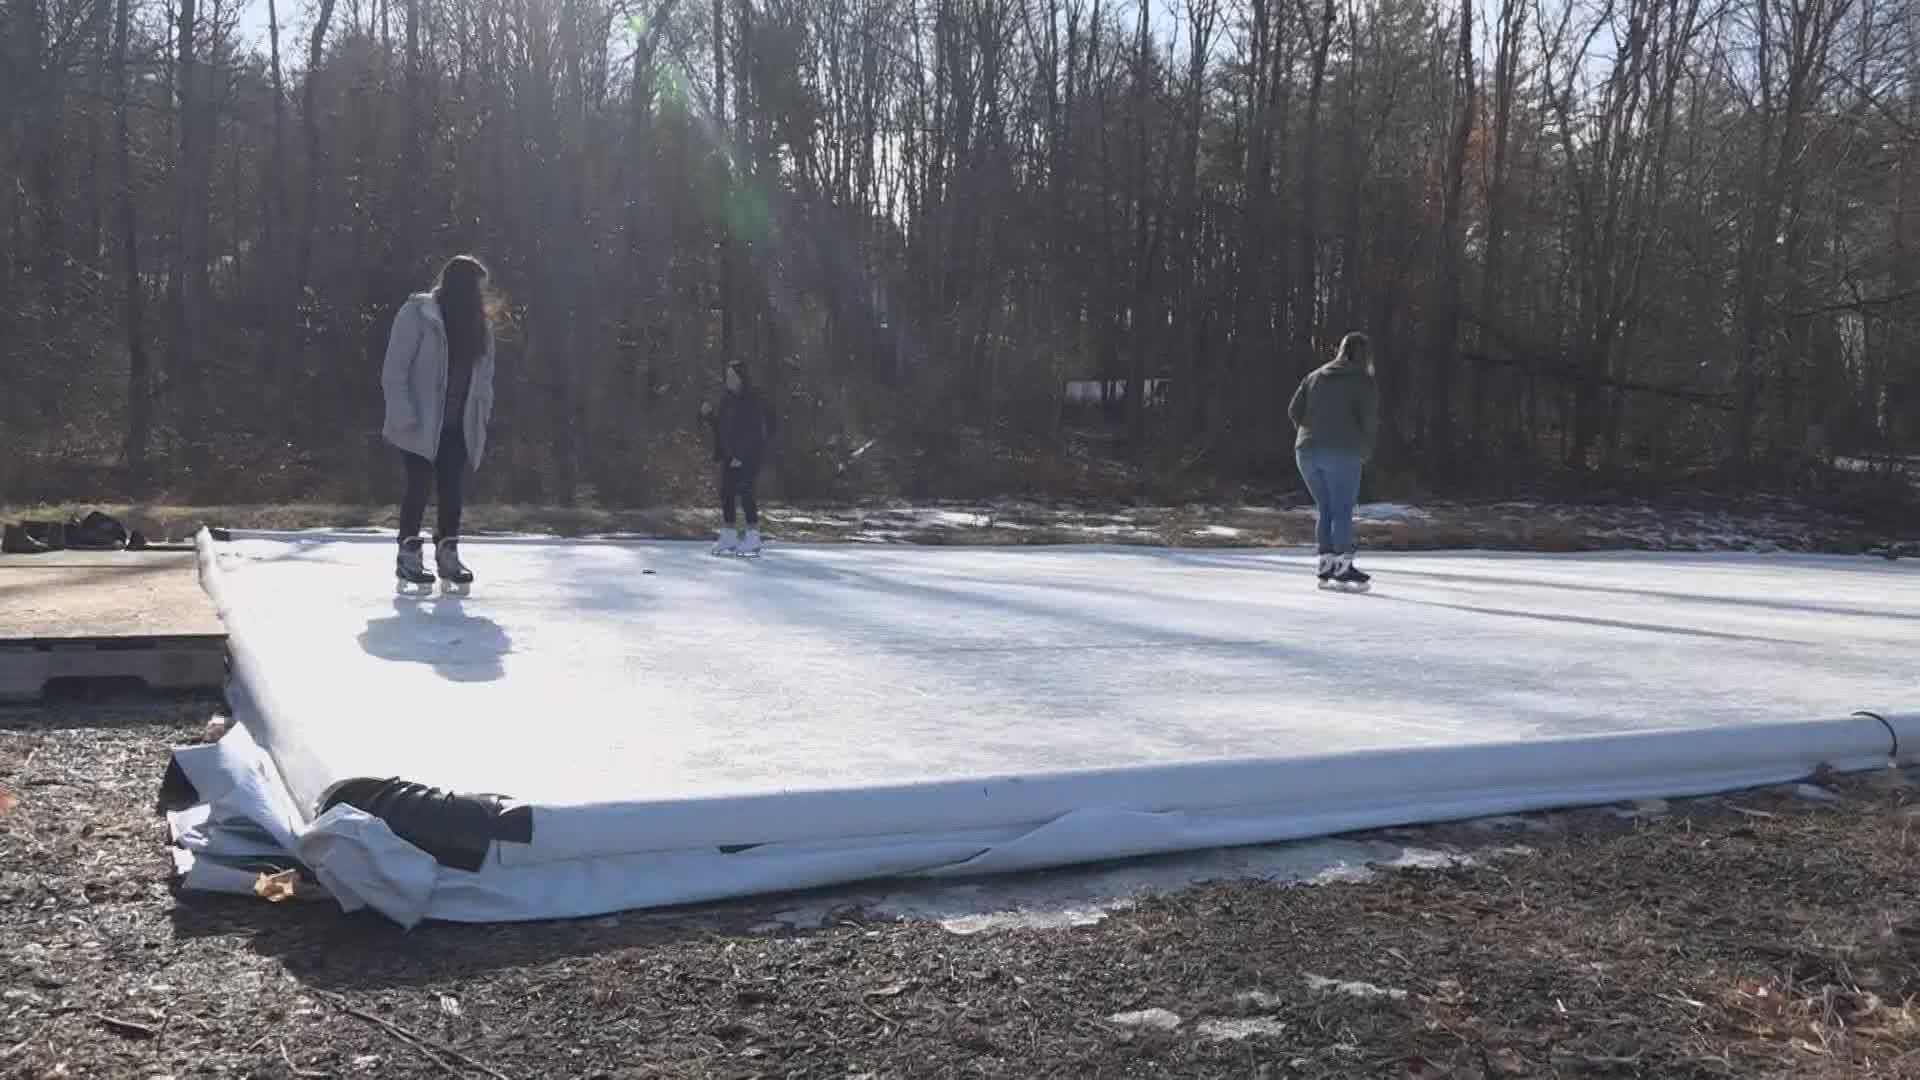 Some Maine towns, like South Berwick, are building outdoor ice skating rinks to get people outdoors safely.